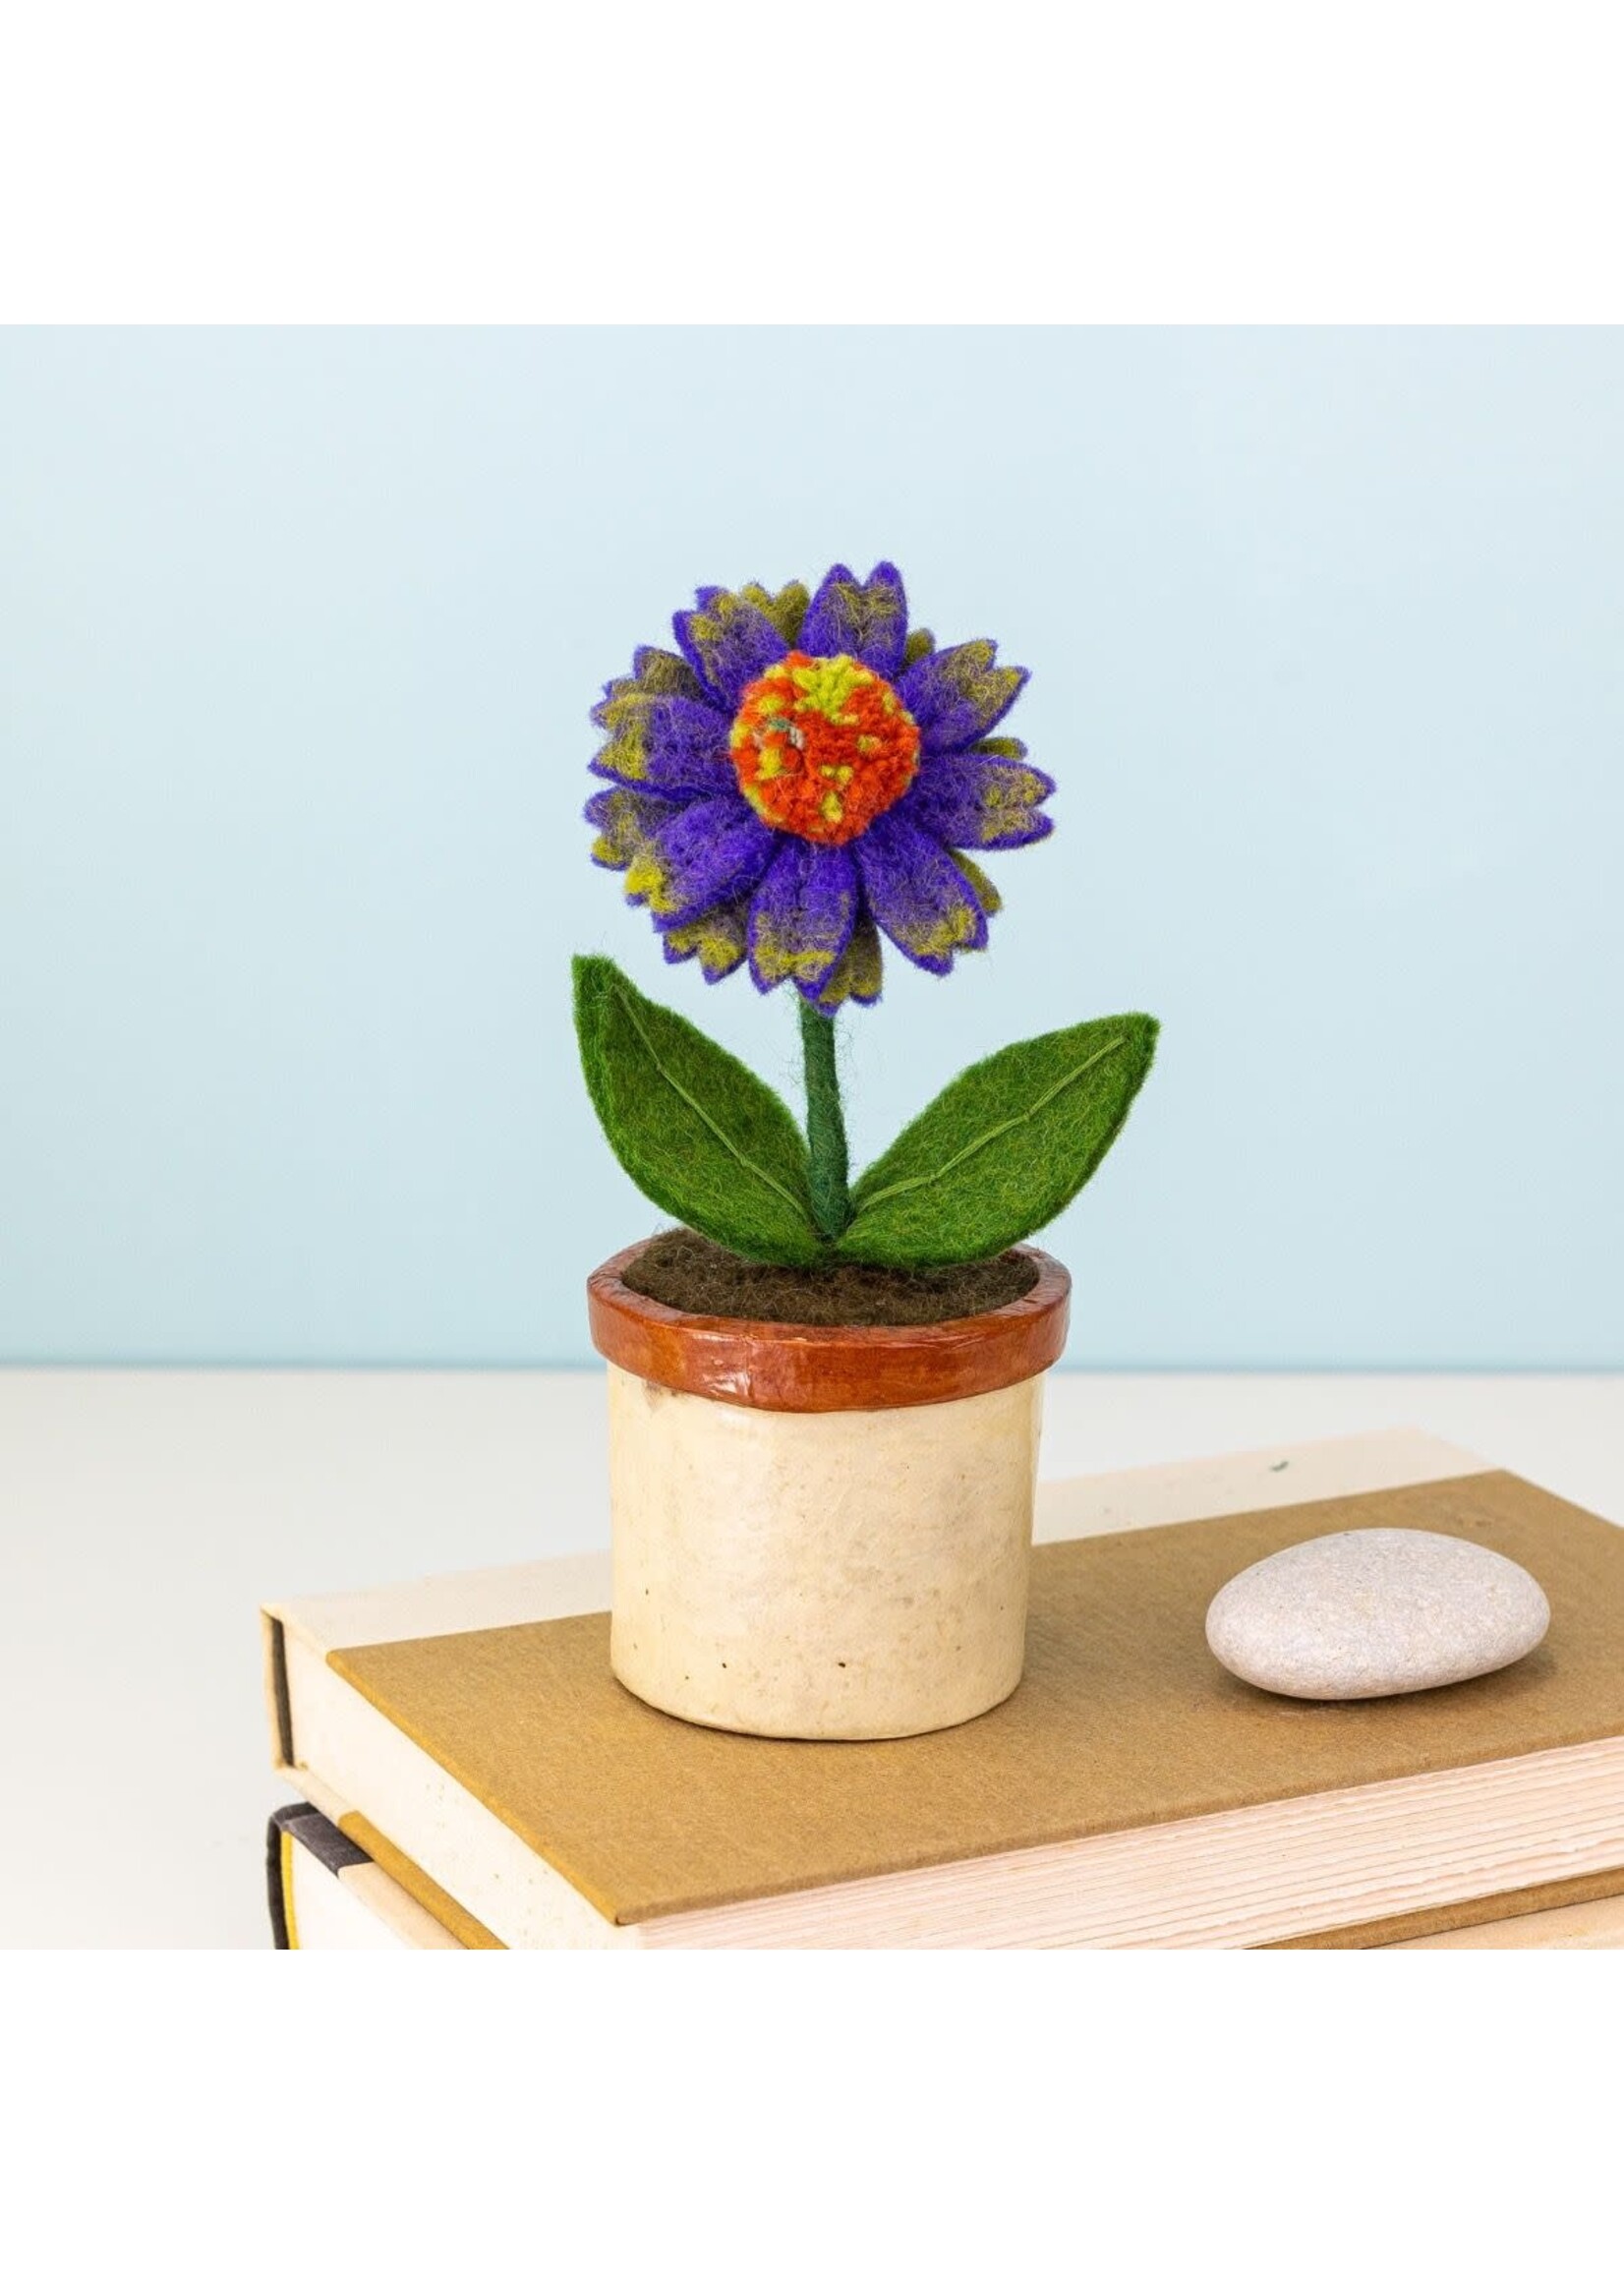 Felt Potted Plant - Cone Flower